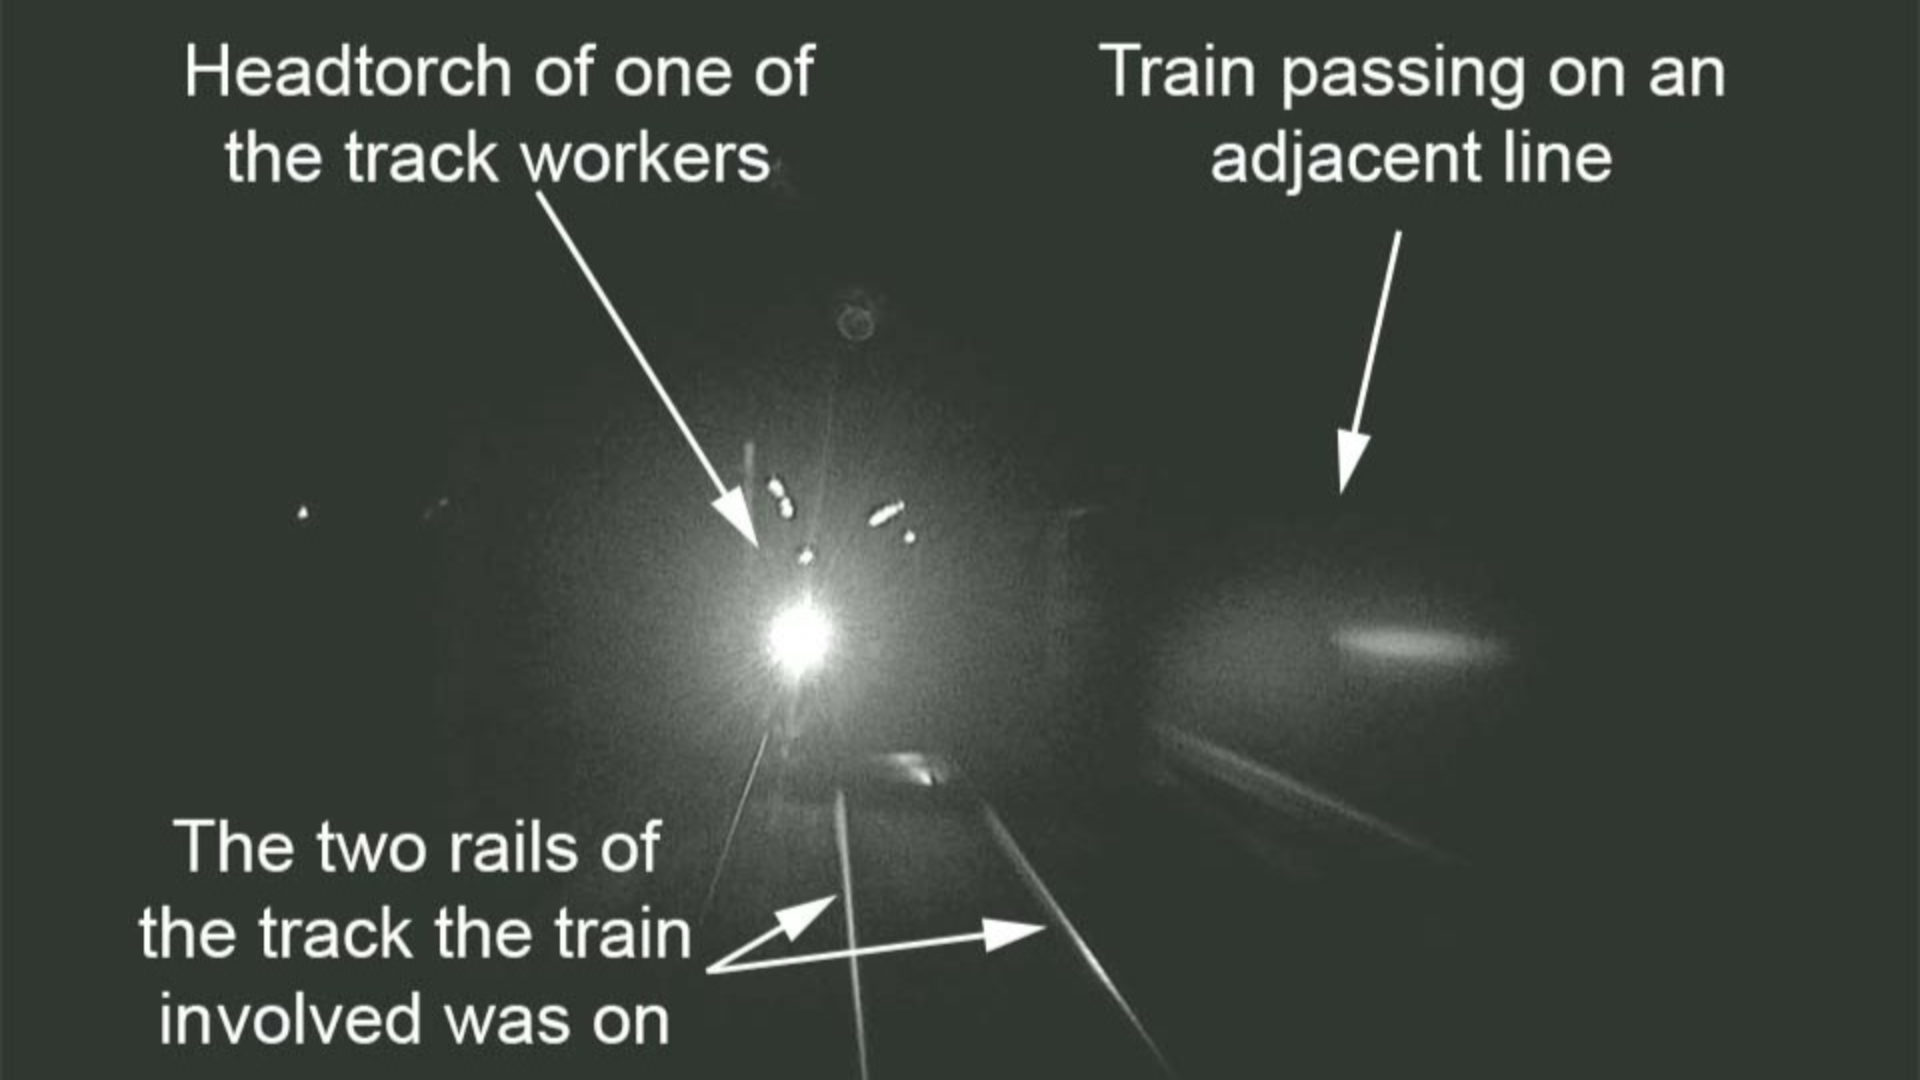 Rail workers train collision - An image of CCTV showing a train head in the dark.